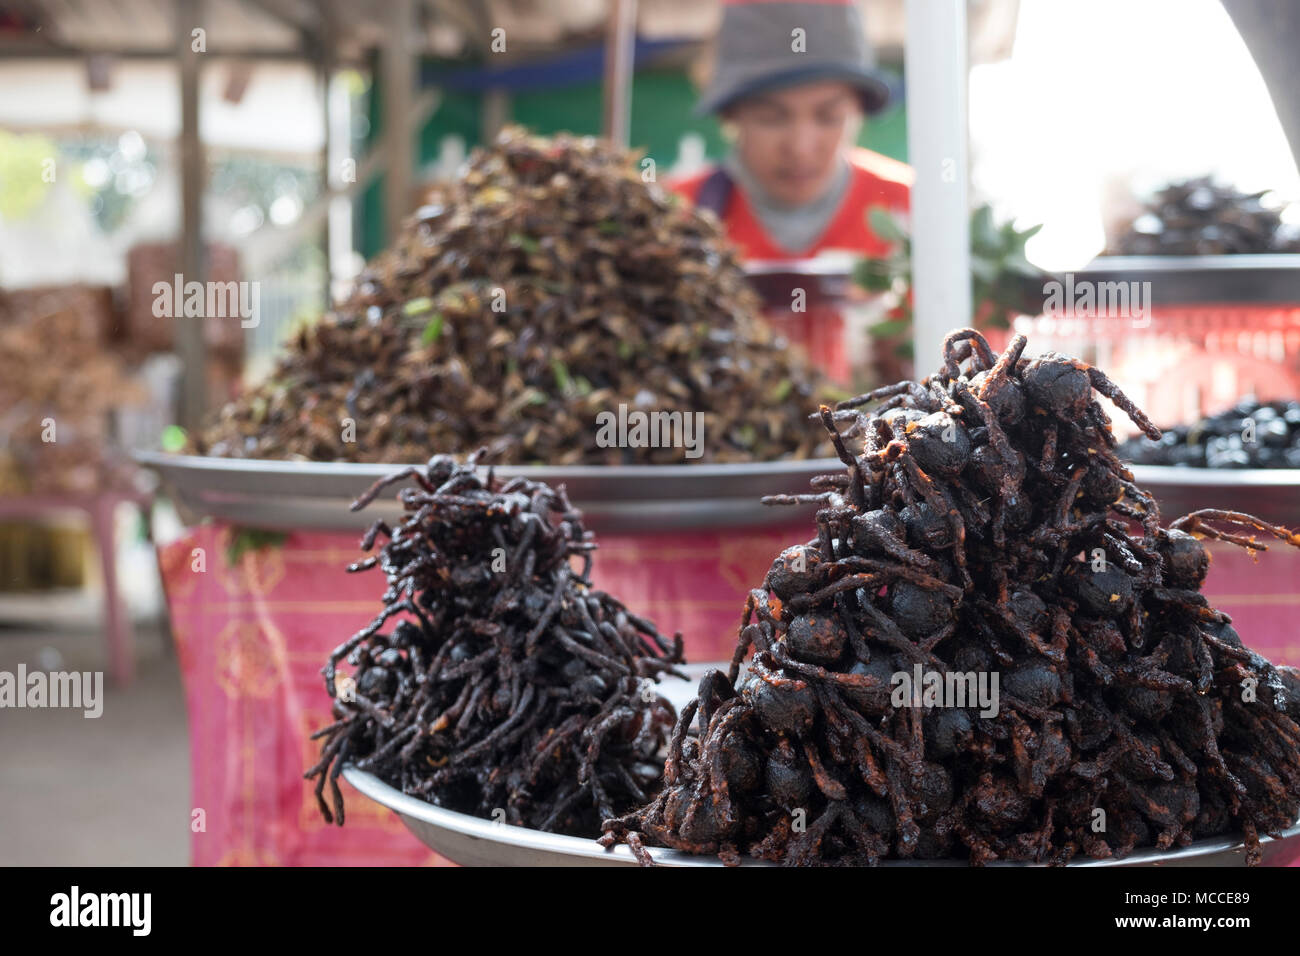 Woman frying tarantula spiders at a roadside stall in Cambodia Stock Photo